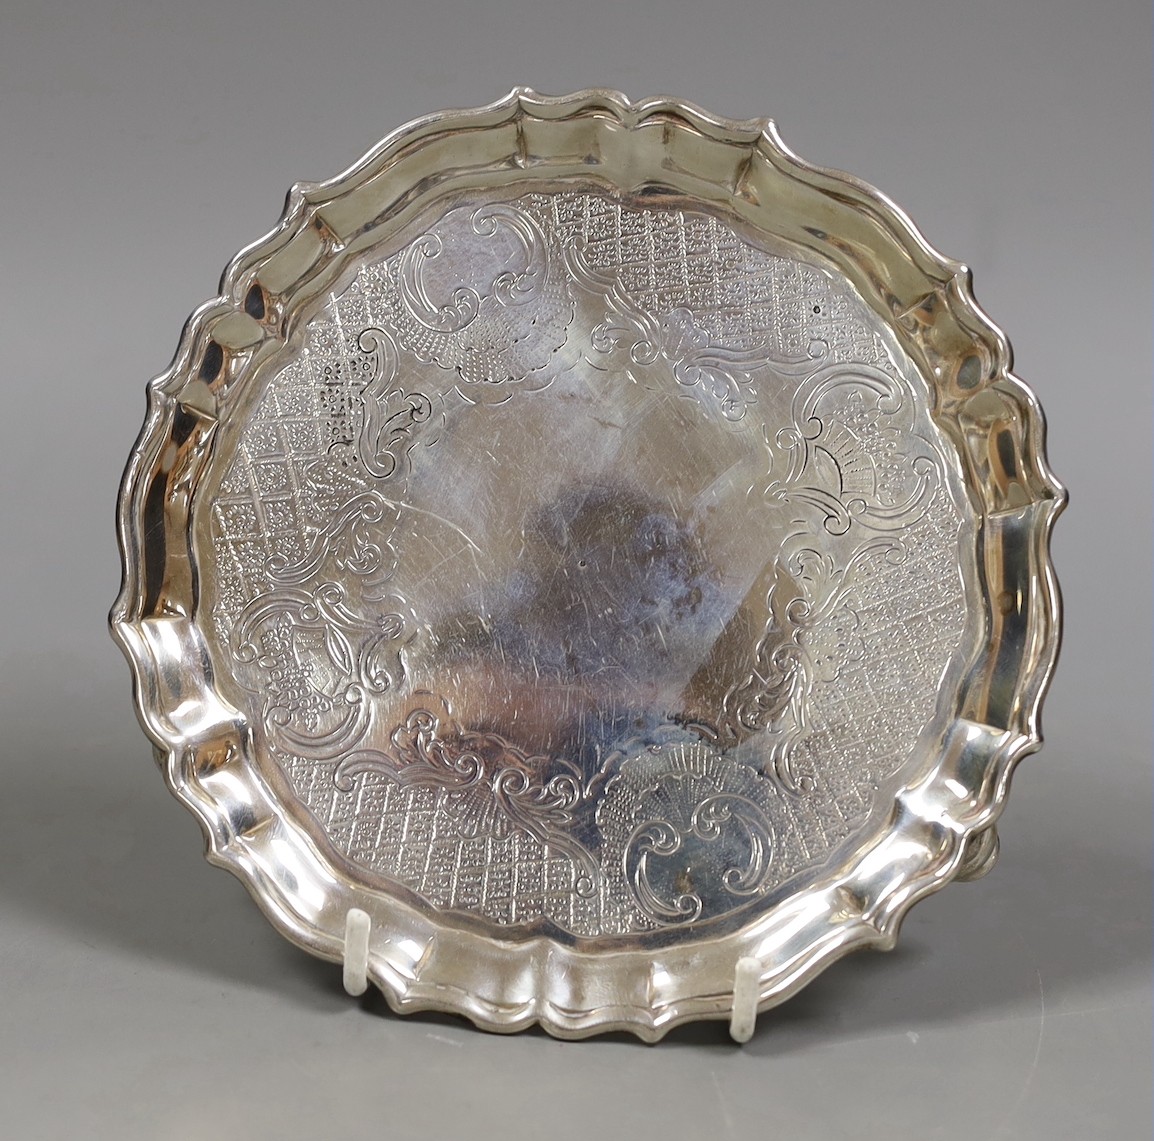 A George II silver waiter, with later? engraved decoration, indistinct maker's mark, London, 1736, 15.3cm, 7.5oz.                                                                                                           